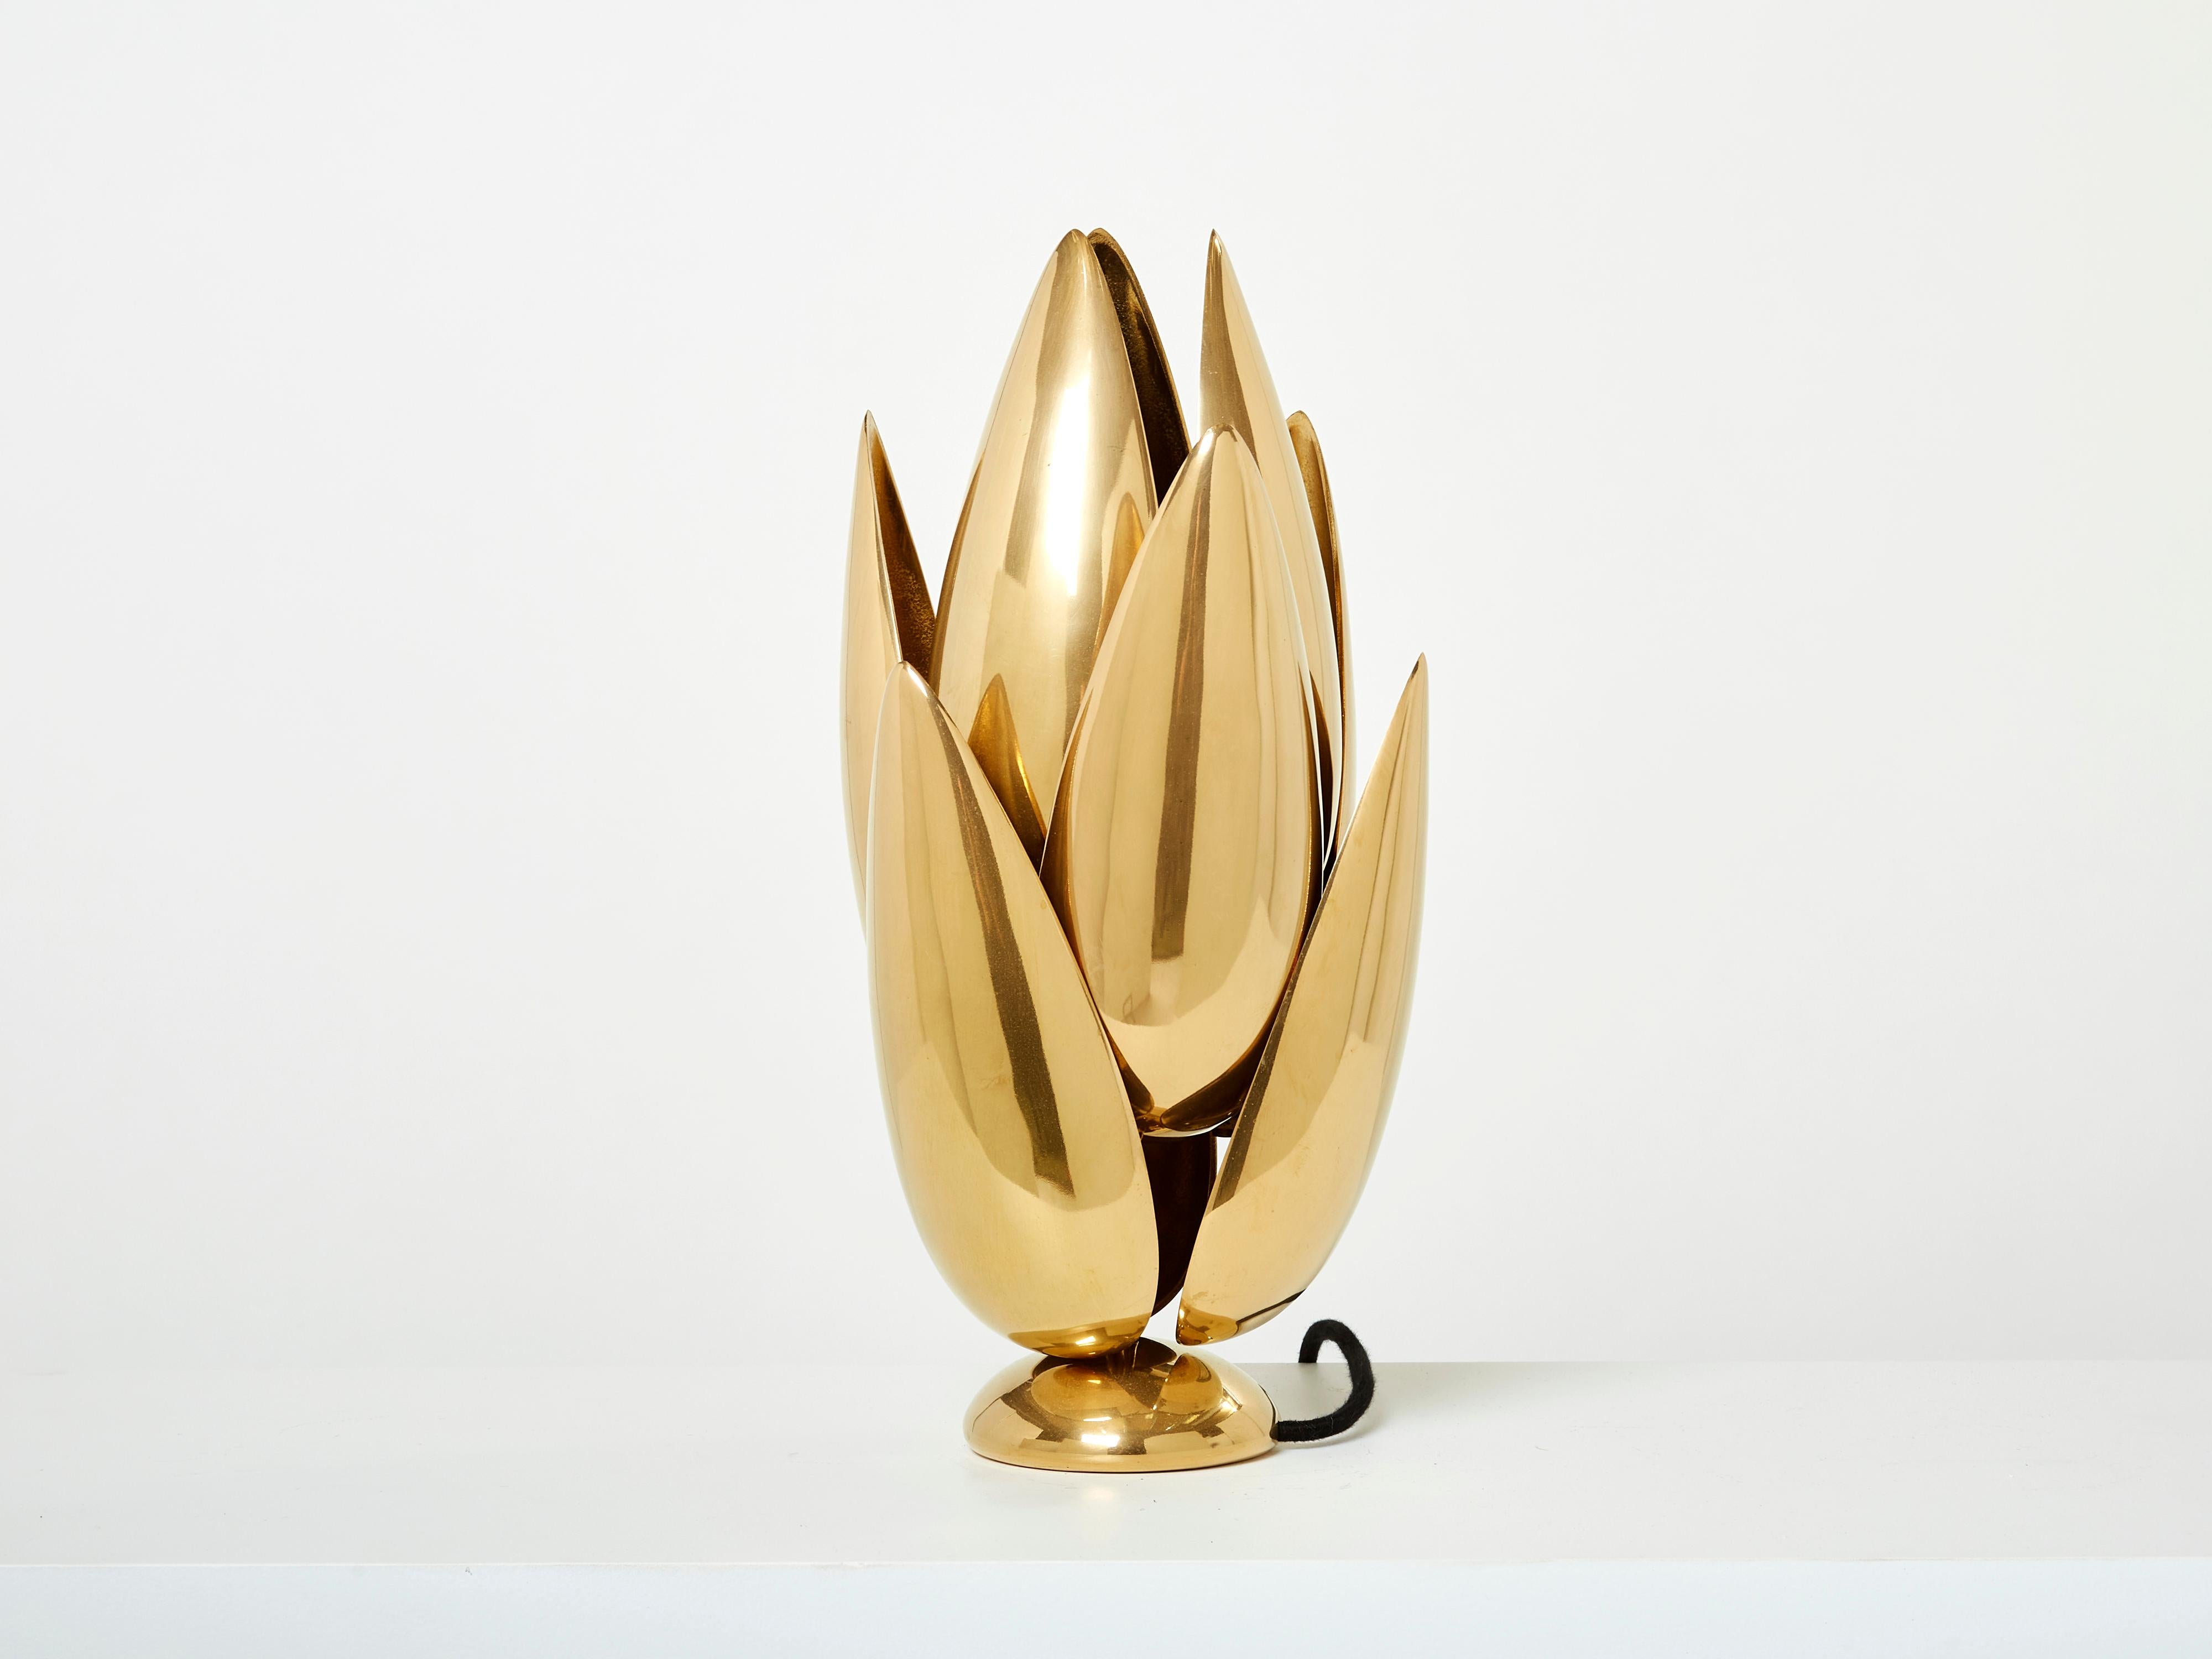 This beautiful table lamp produced by Atelier Michel Armand in the 1970s has the visual impact of a modernist sculpture. This rare model, named Lotus, is made of solid bronze fully gilded, and shaped as a lotus flower. The result is the impression